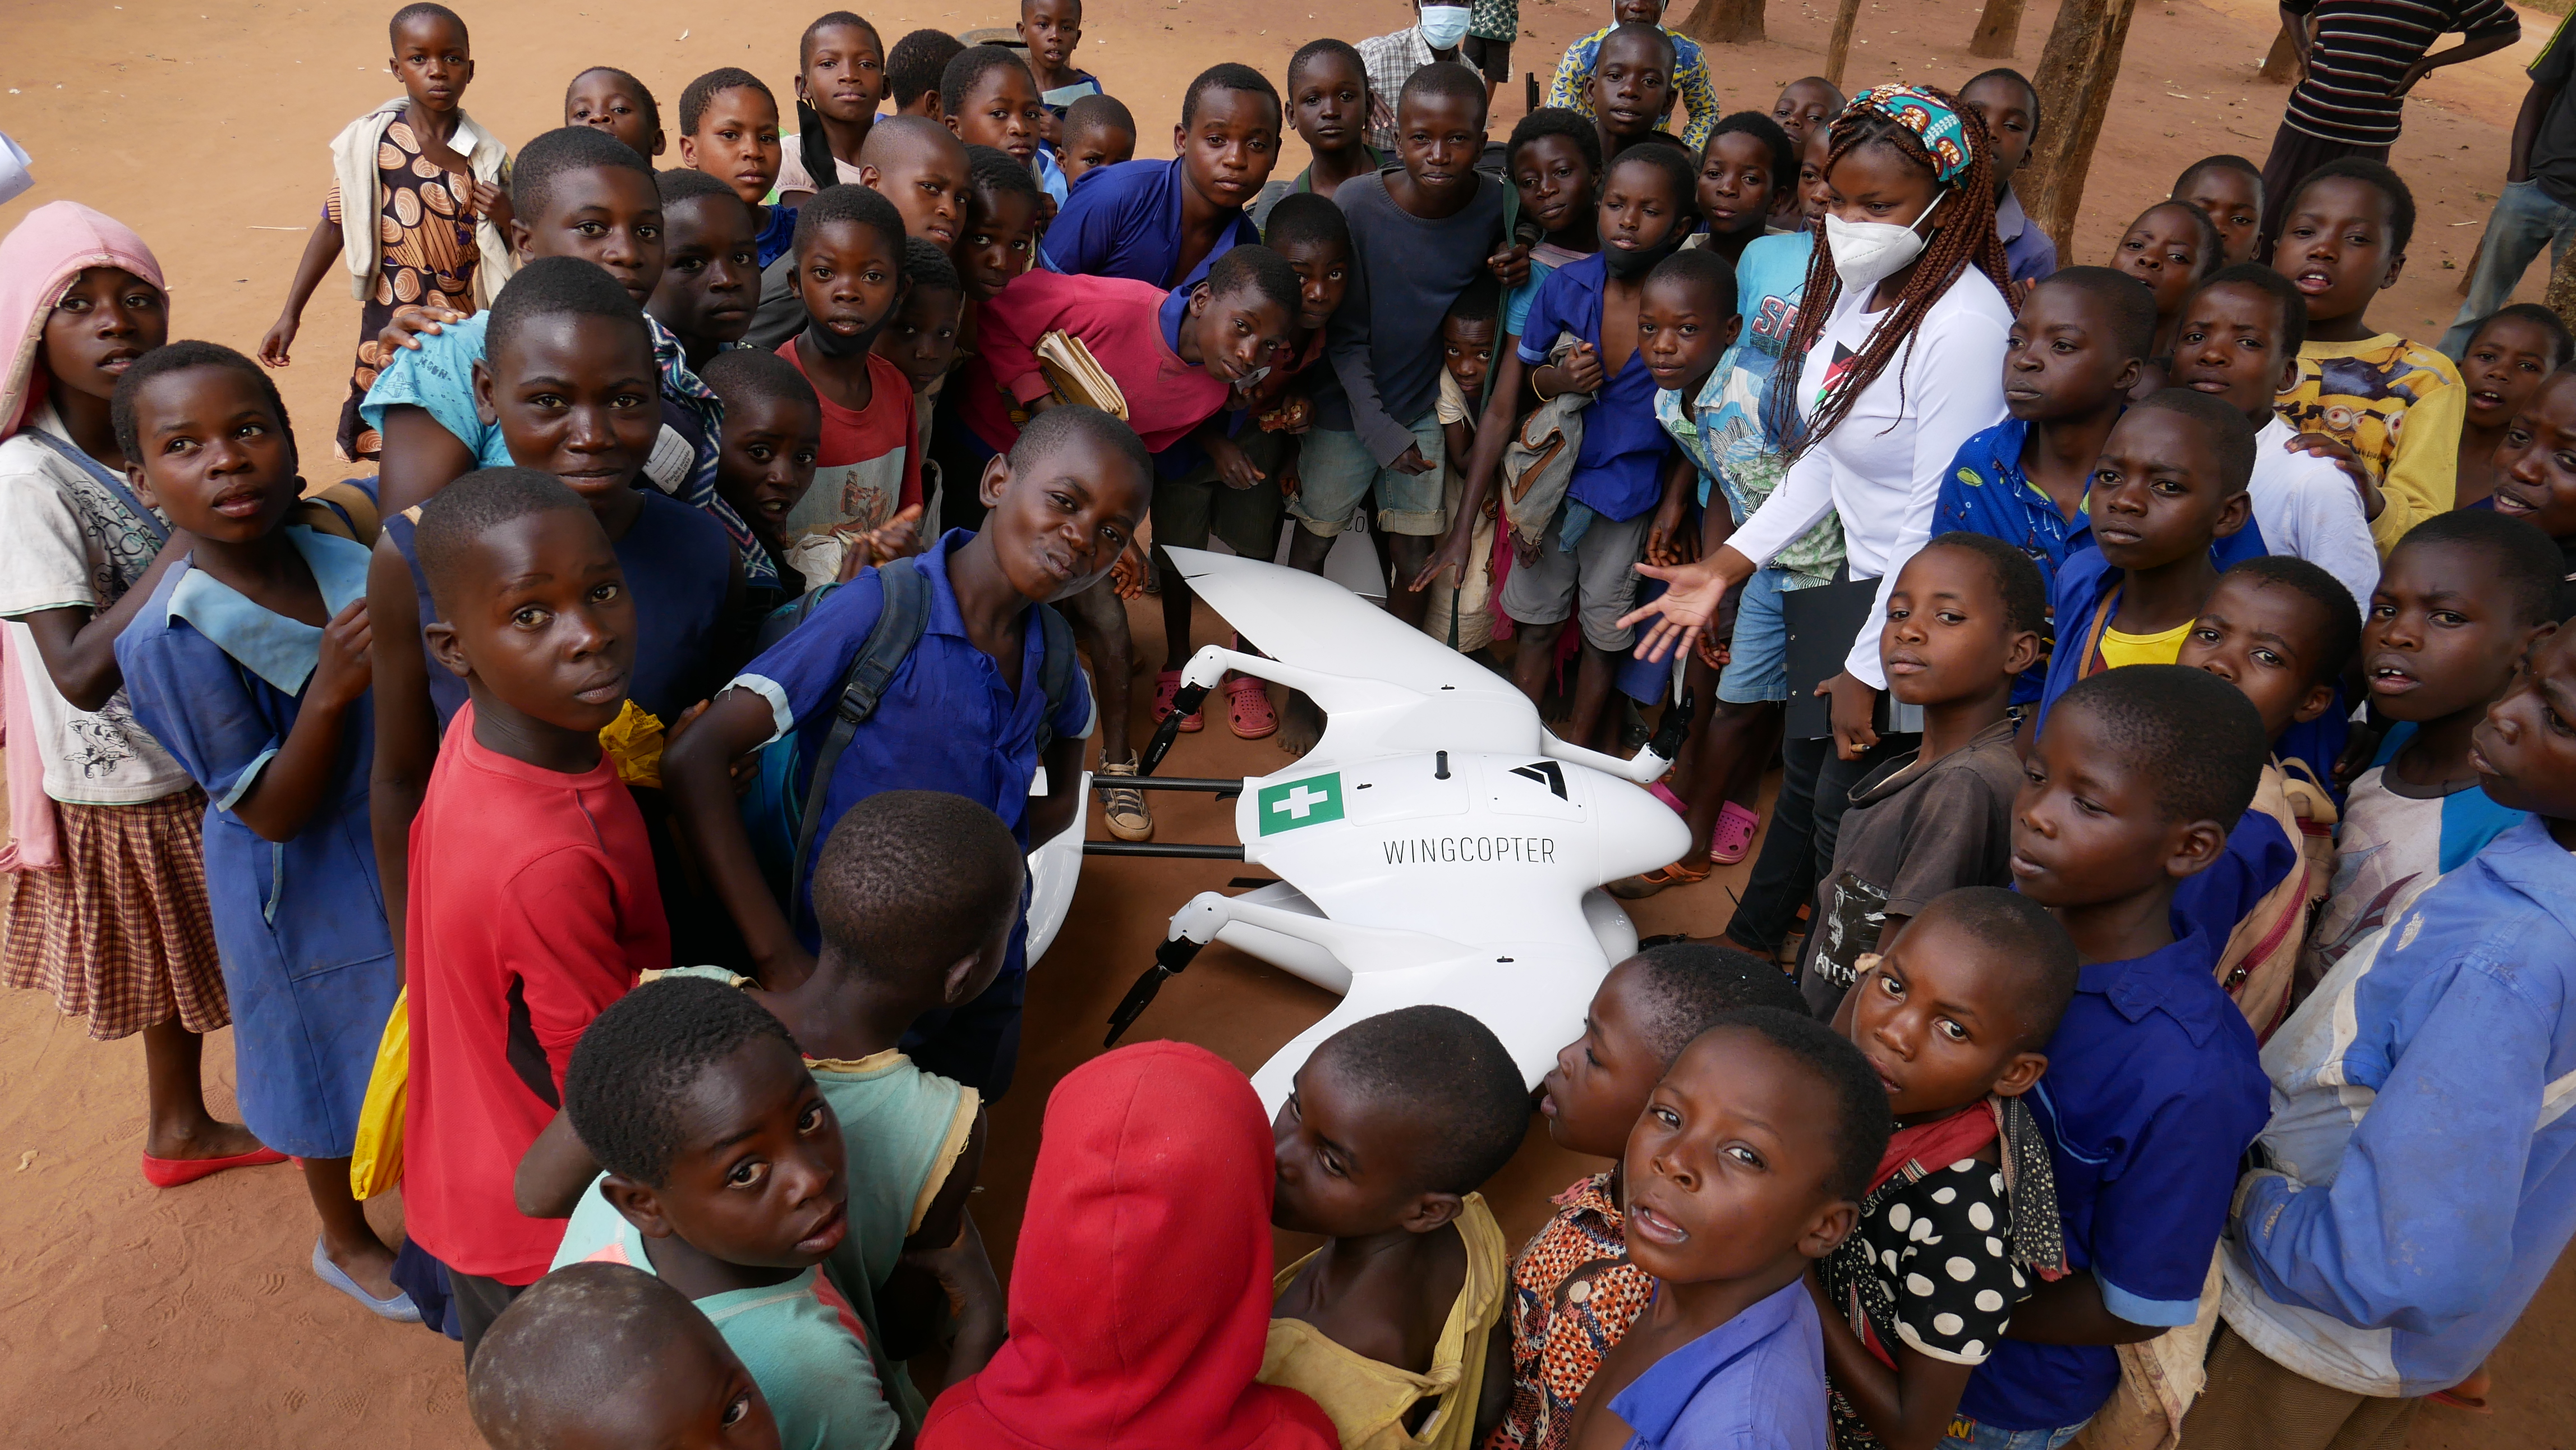 Drones and Data Aid team with children in Malawi, inspiring the next generation to reach for the skies.